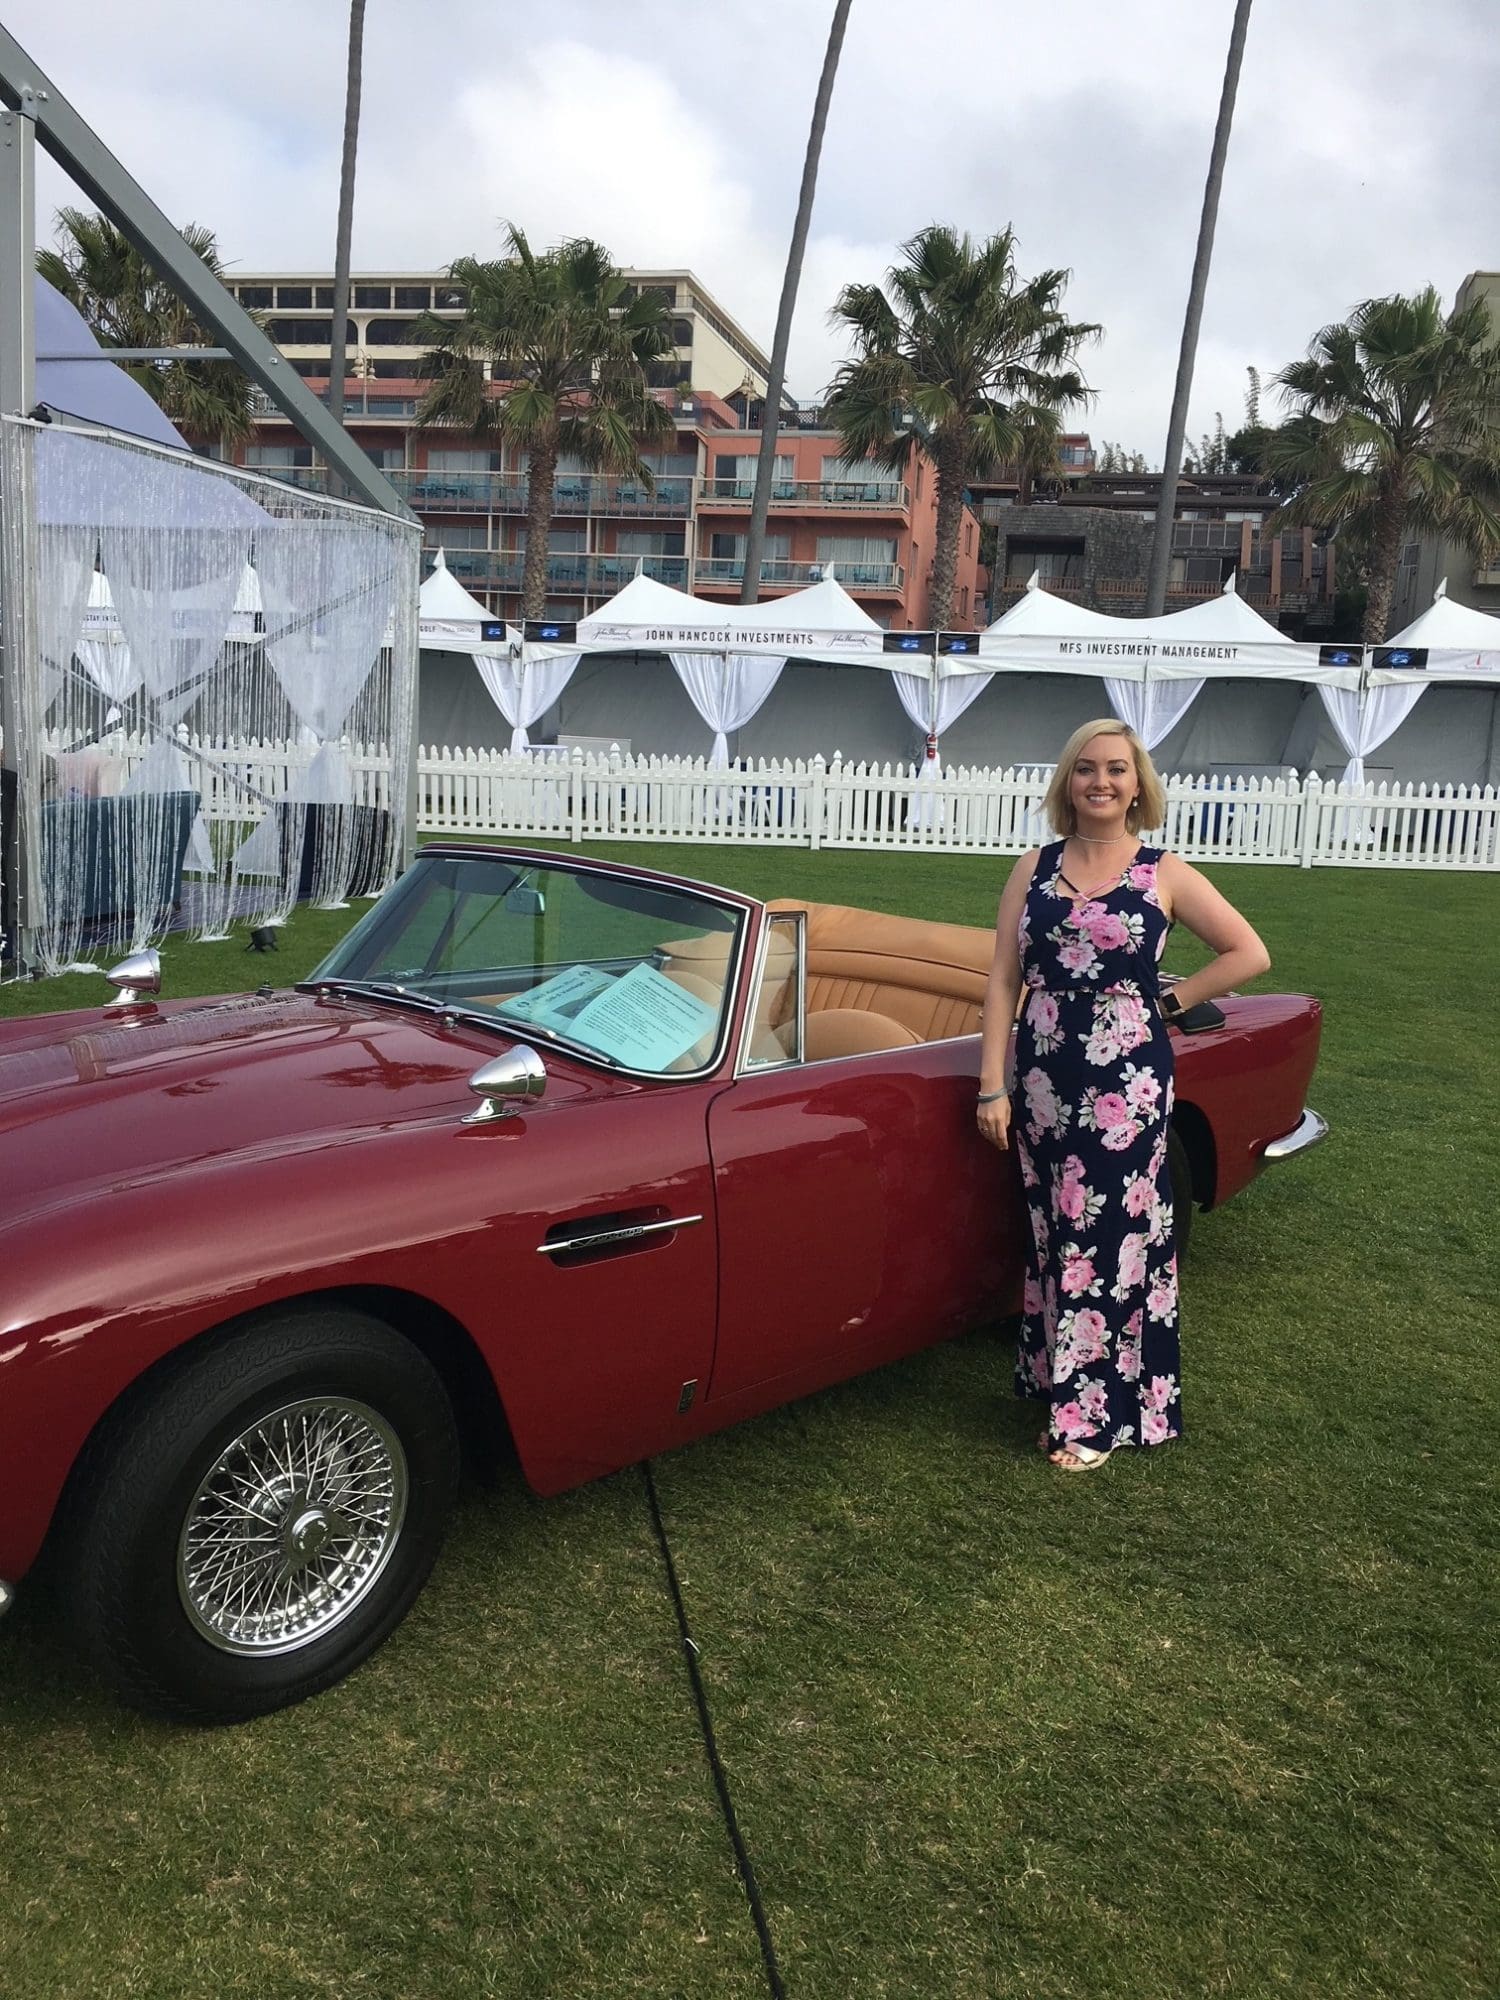 Lauren Shanklin with Hagerty Insurance with her classic car